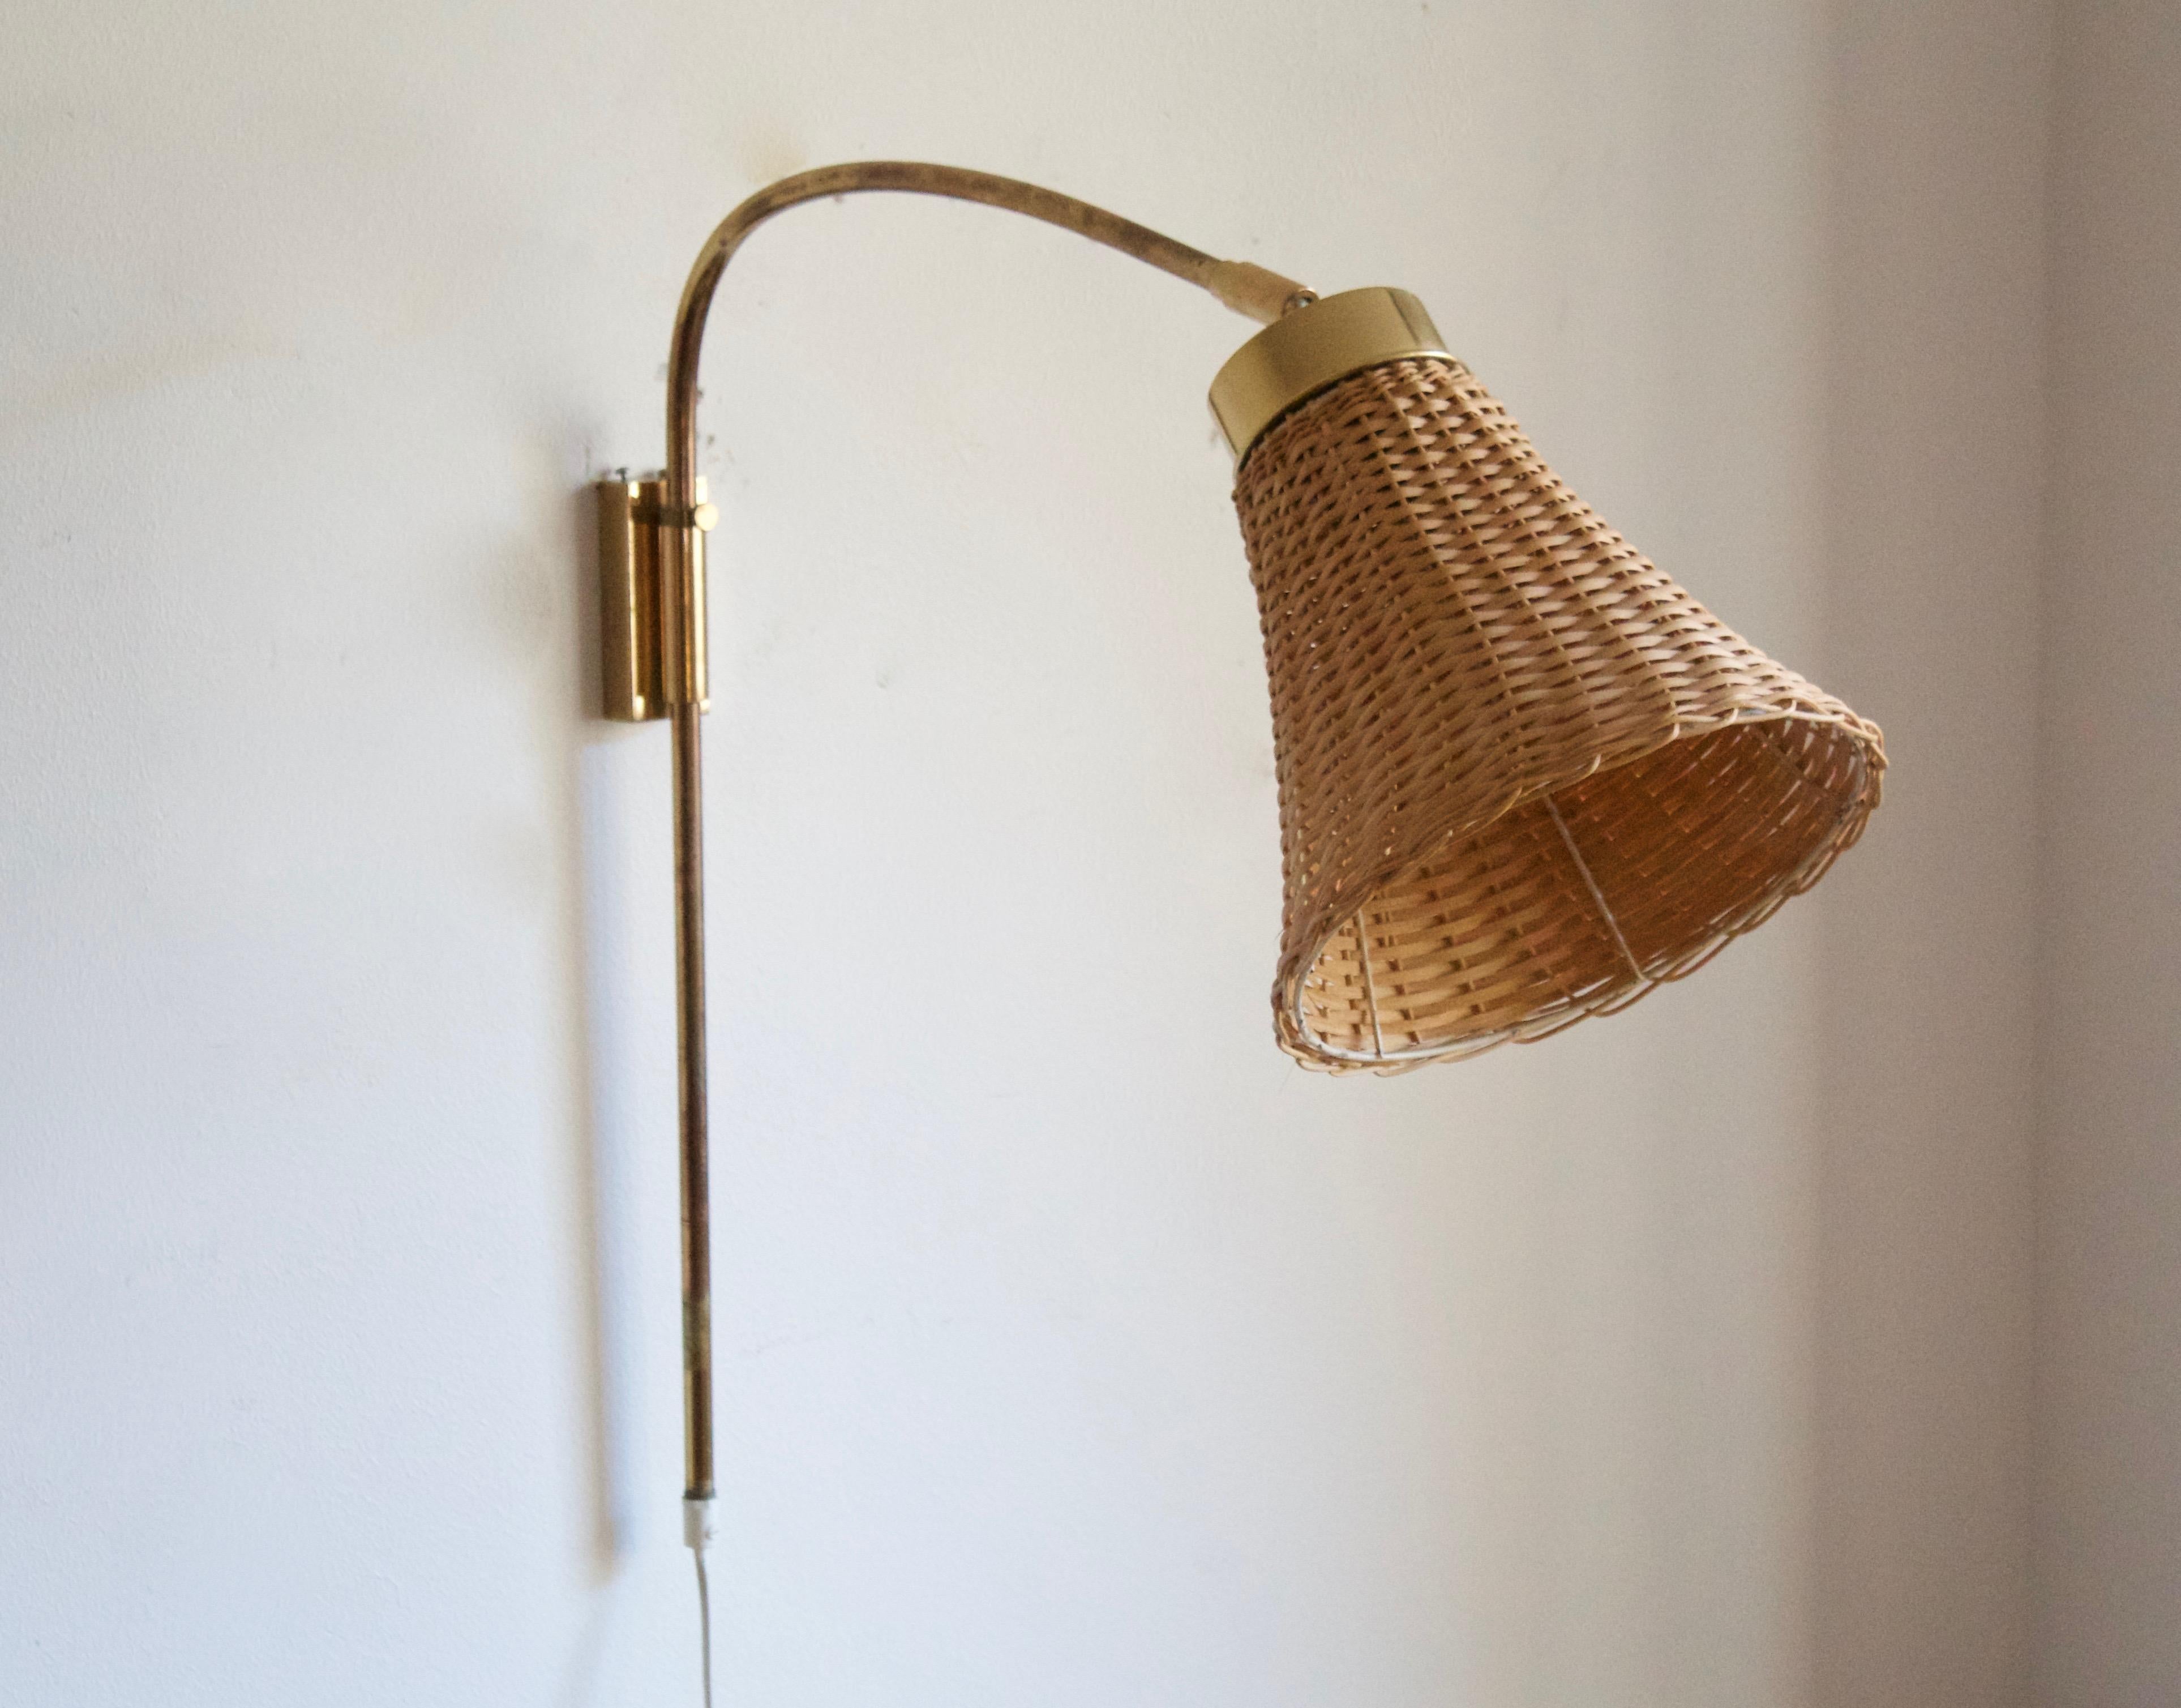 An adjustable wall light / sconce / task light. Designed by Josef Frank 1920s, produced by Svenskt Tenn, Stockholm, Sweden, c. 1950s. 

Stated dimensions include lampshade as is illustrated. Assorted vintage rattan lampshade.

Other designers of